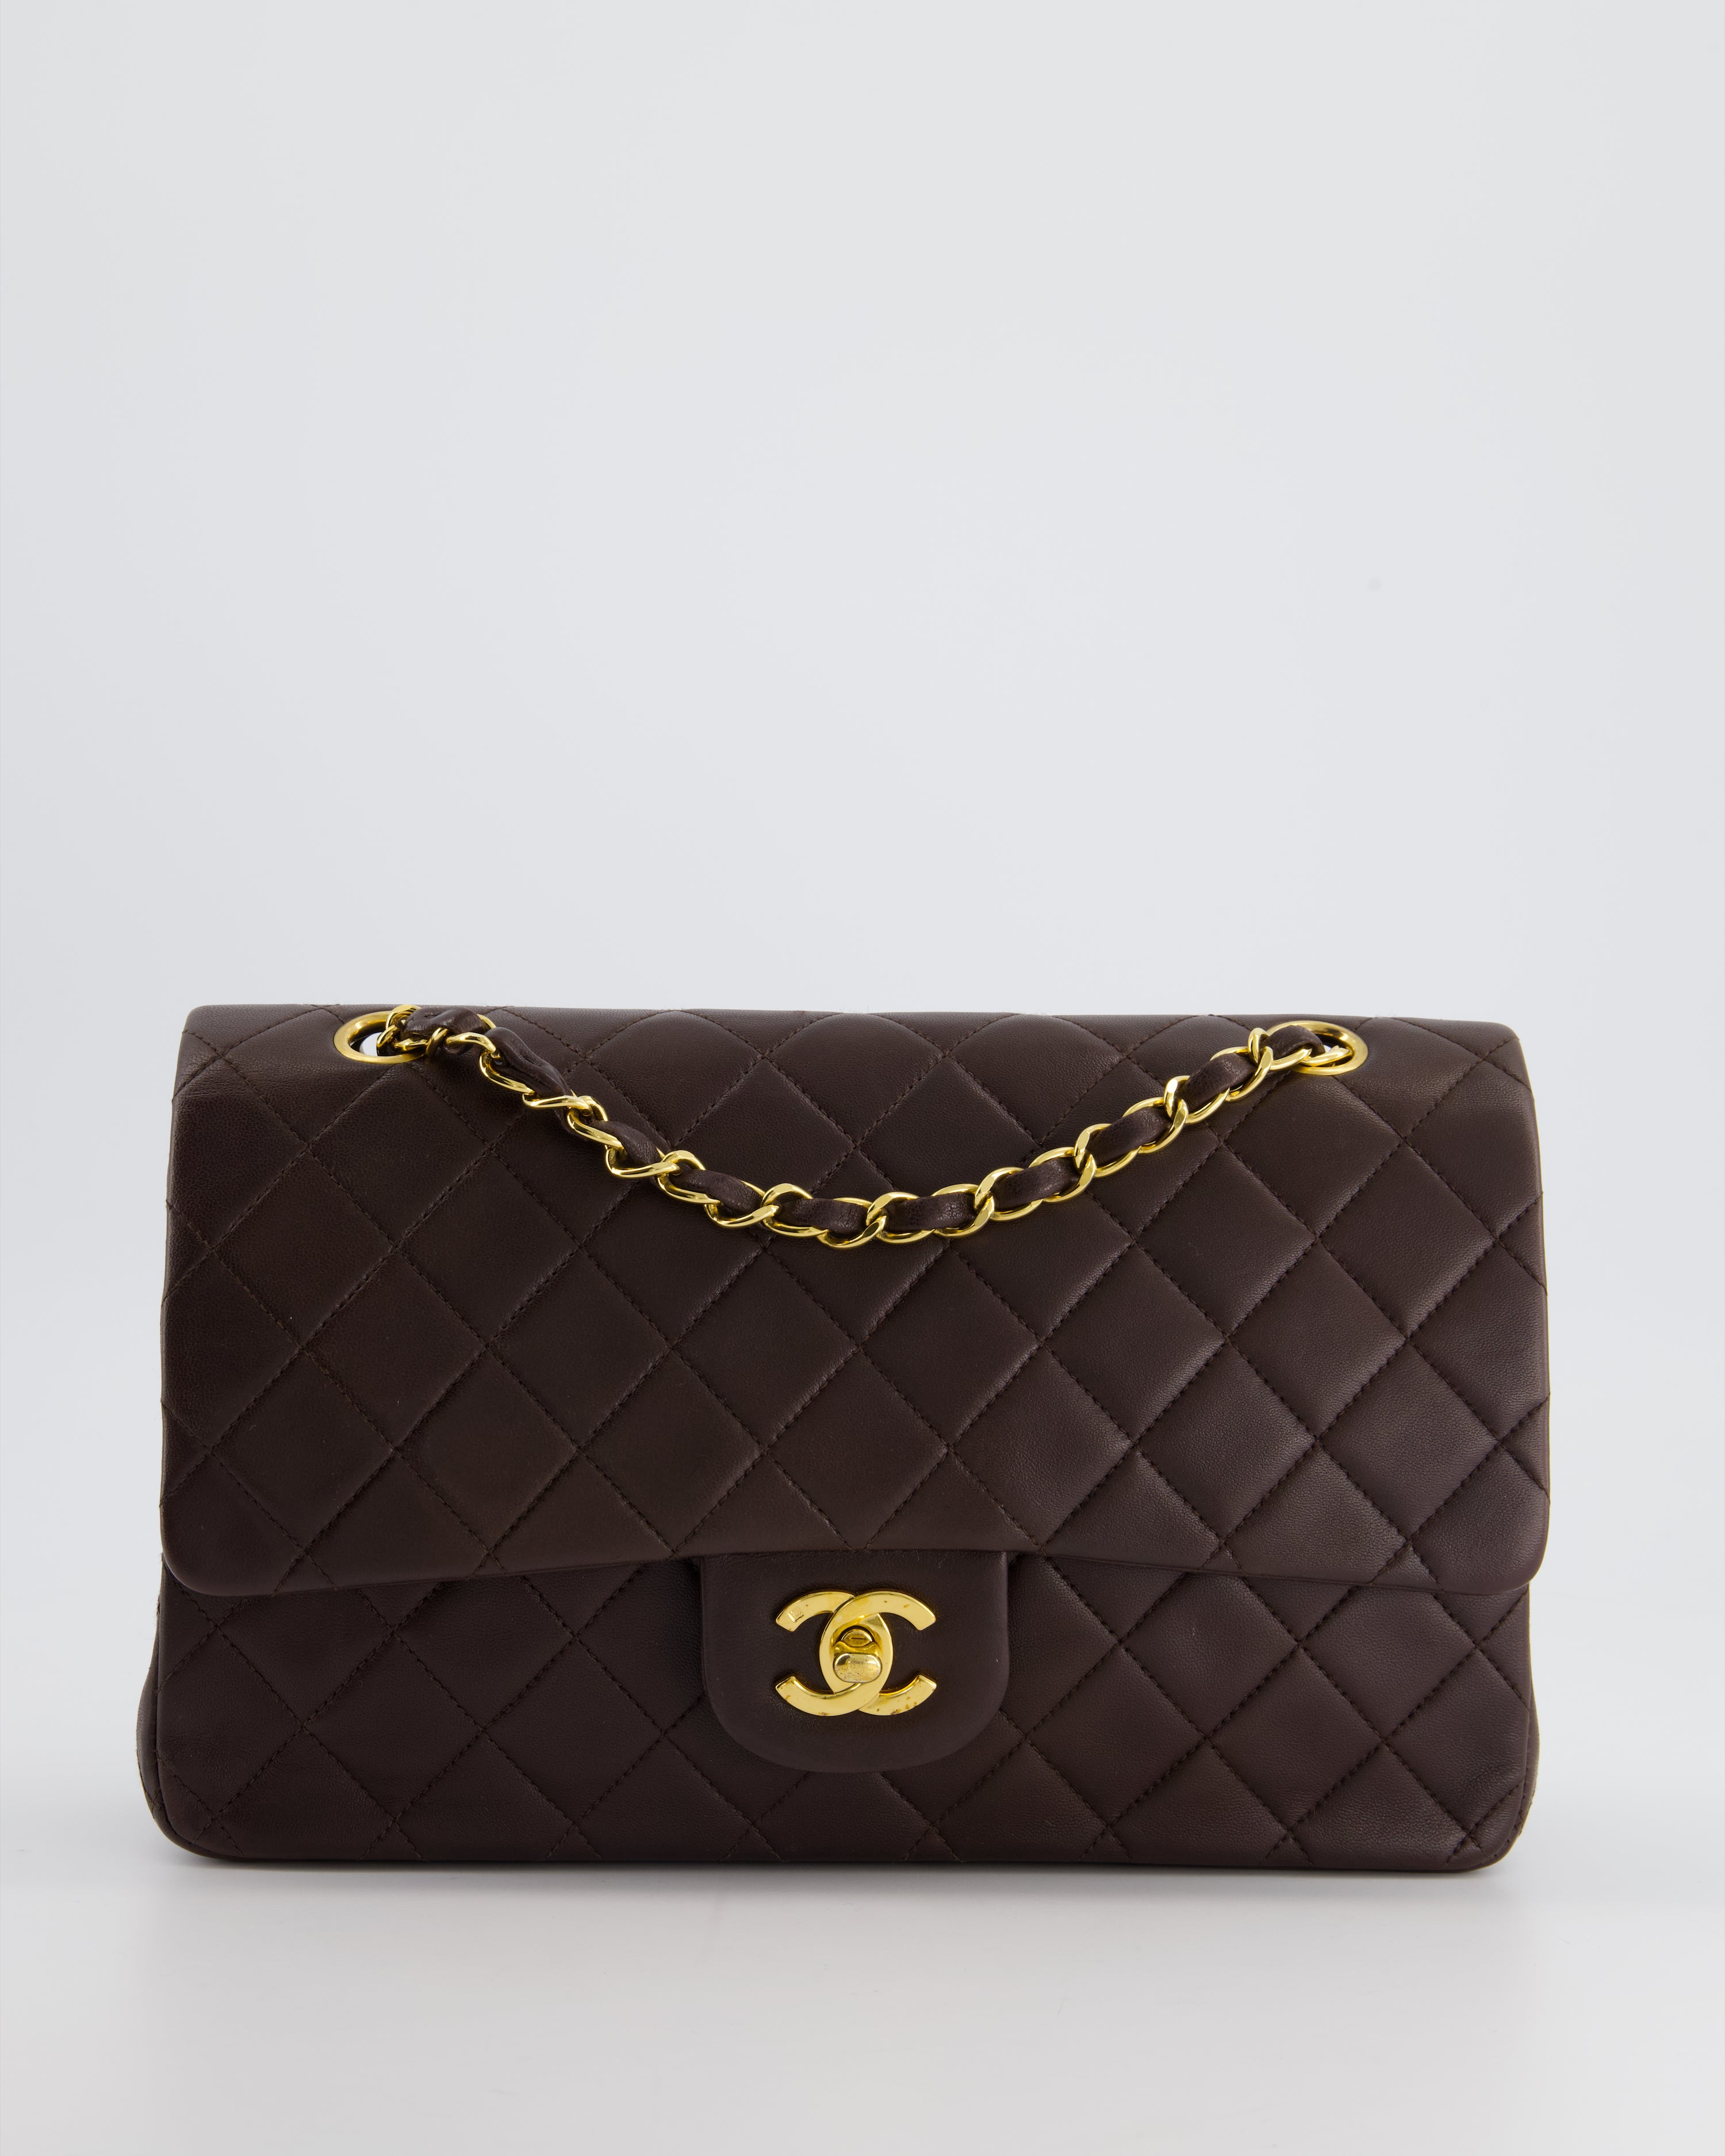 classic chanel bag new authentic